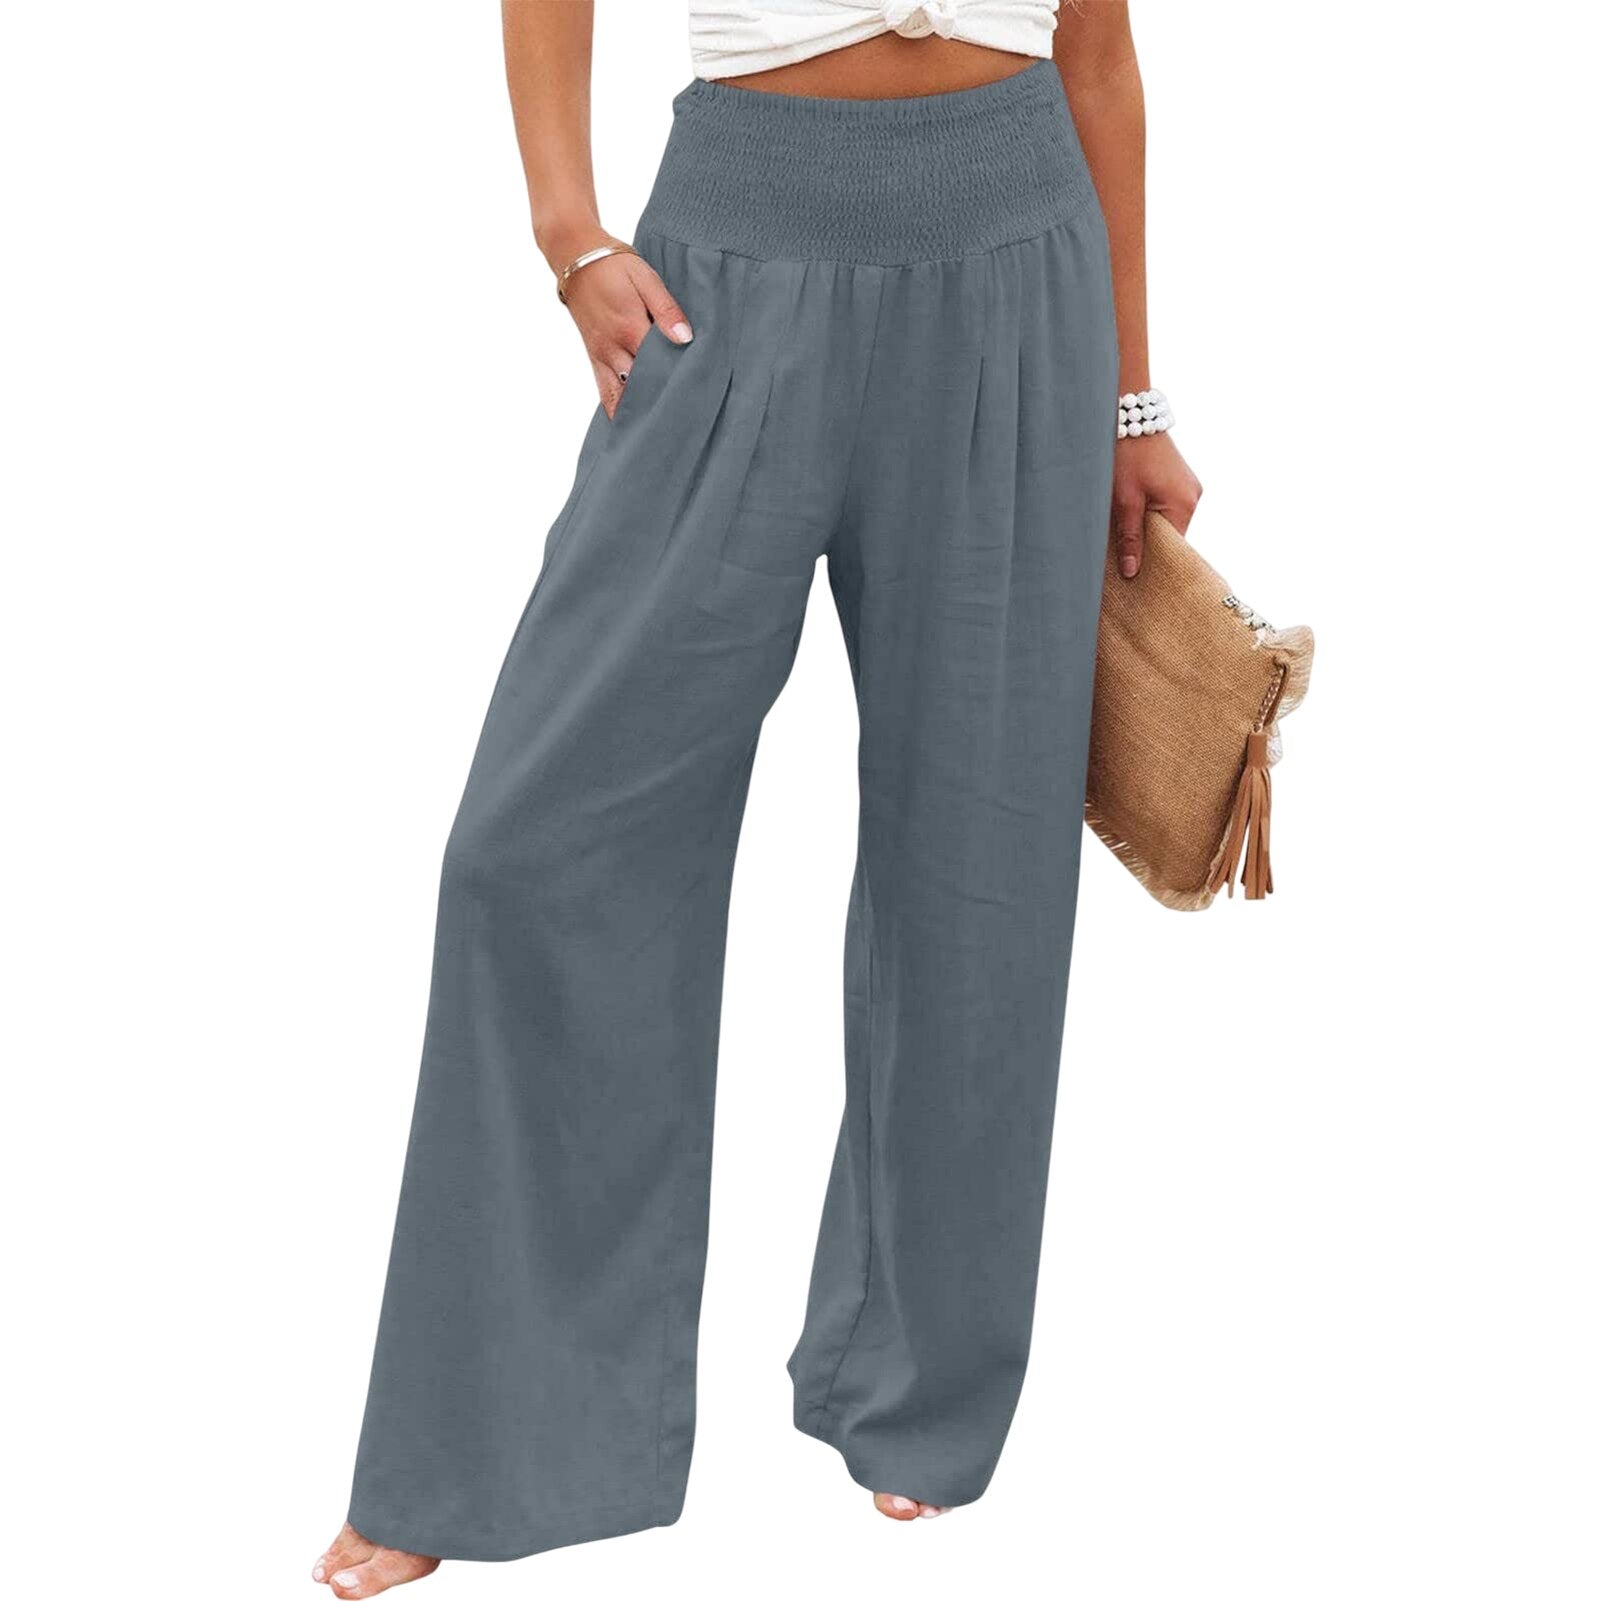 Back to School Cotton Linen Women Loose Casual Pants Pleated Wide Leg Long Pants High Waist Solid with Pockets Fashion Summer Trousers